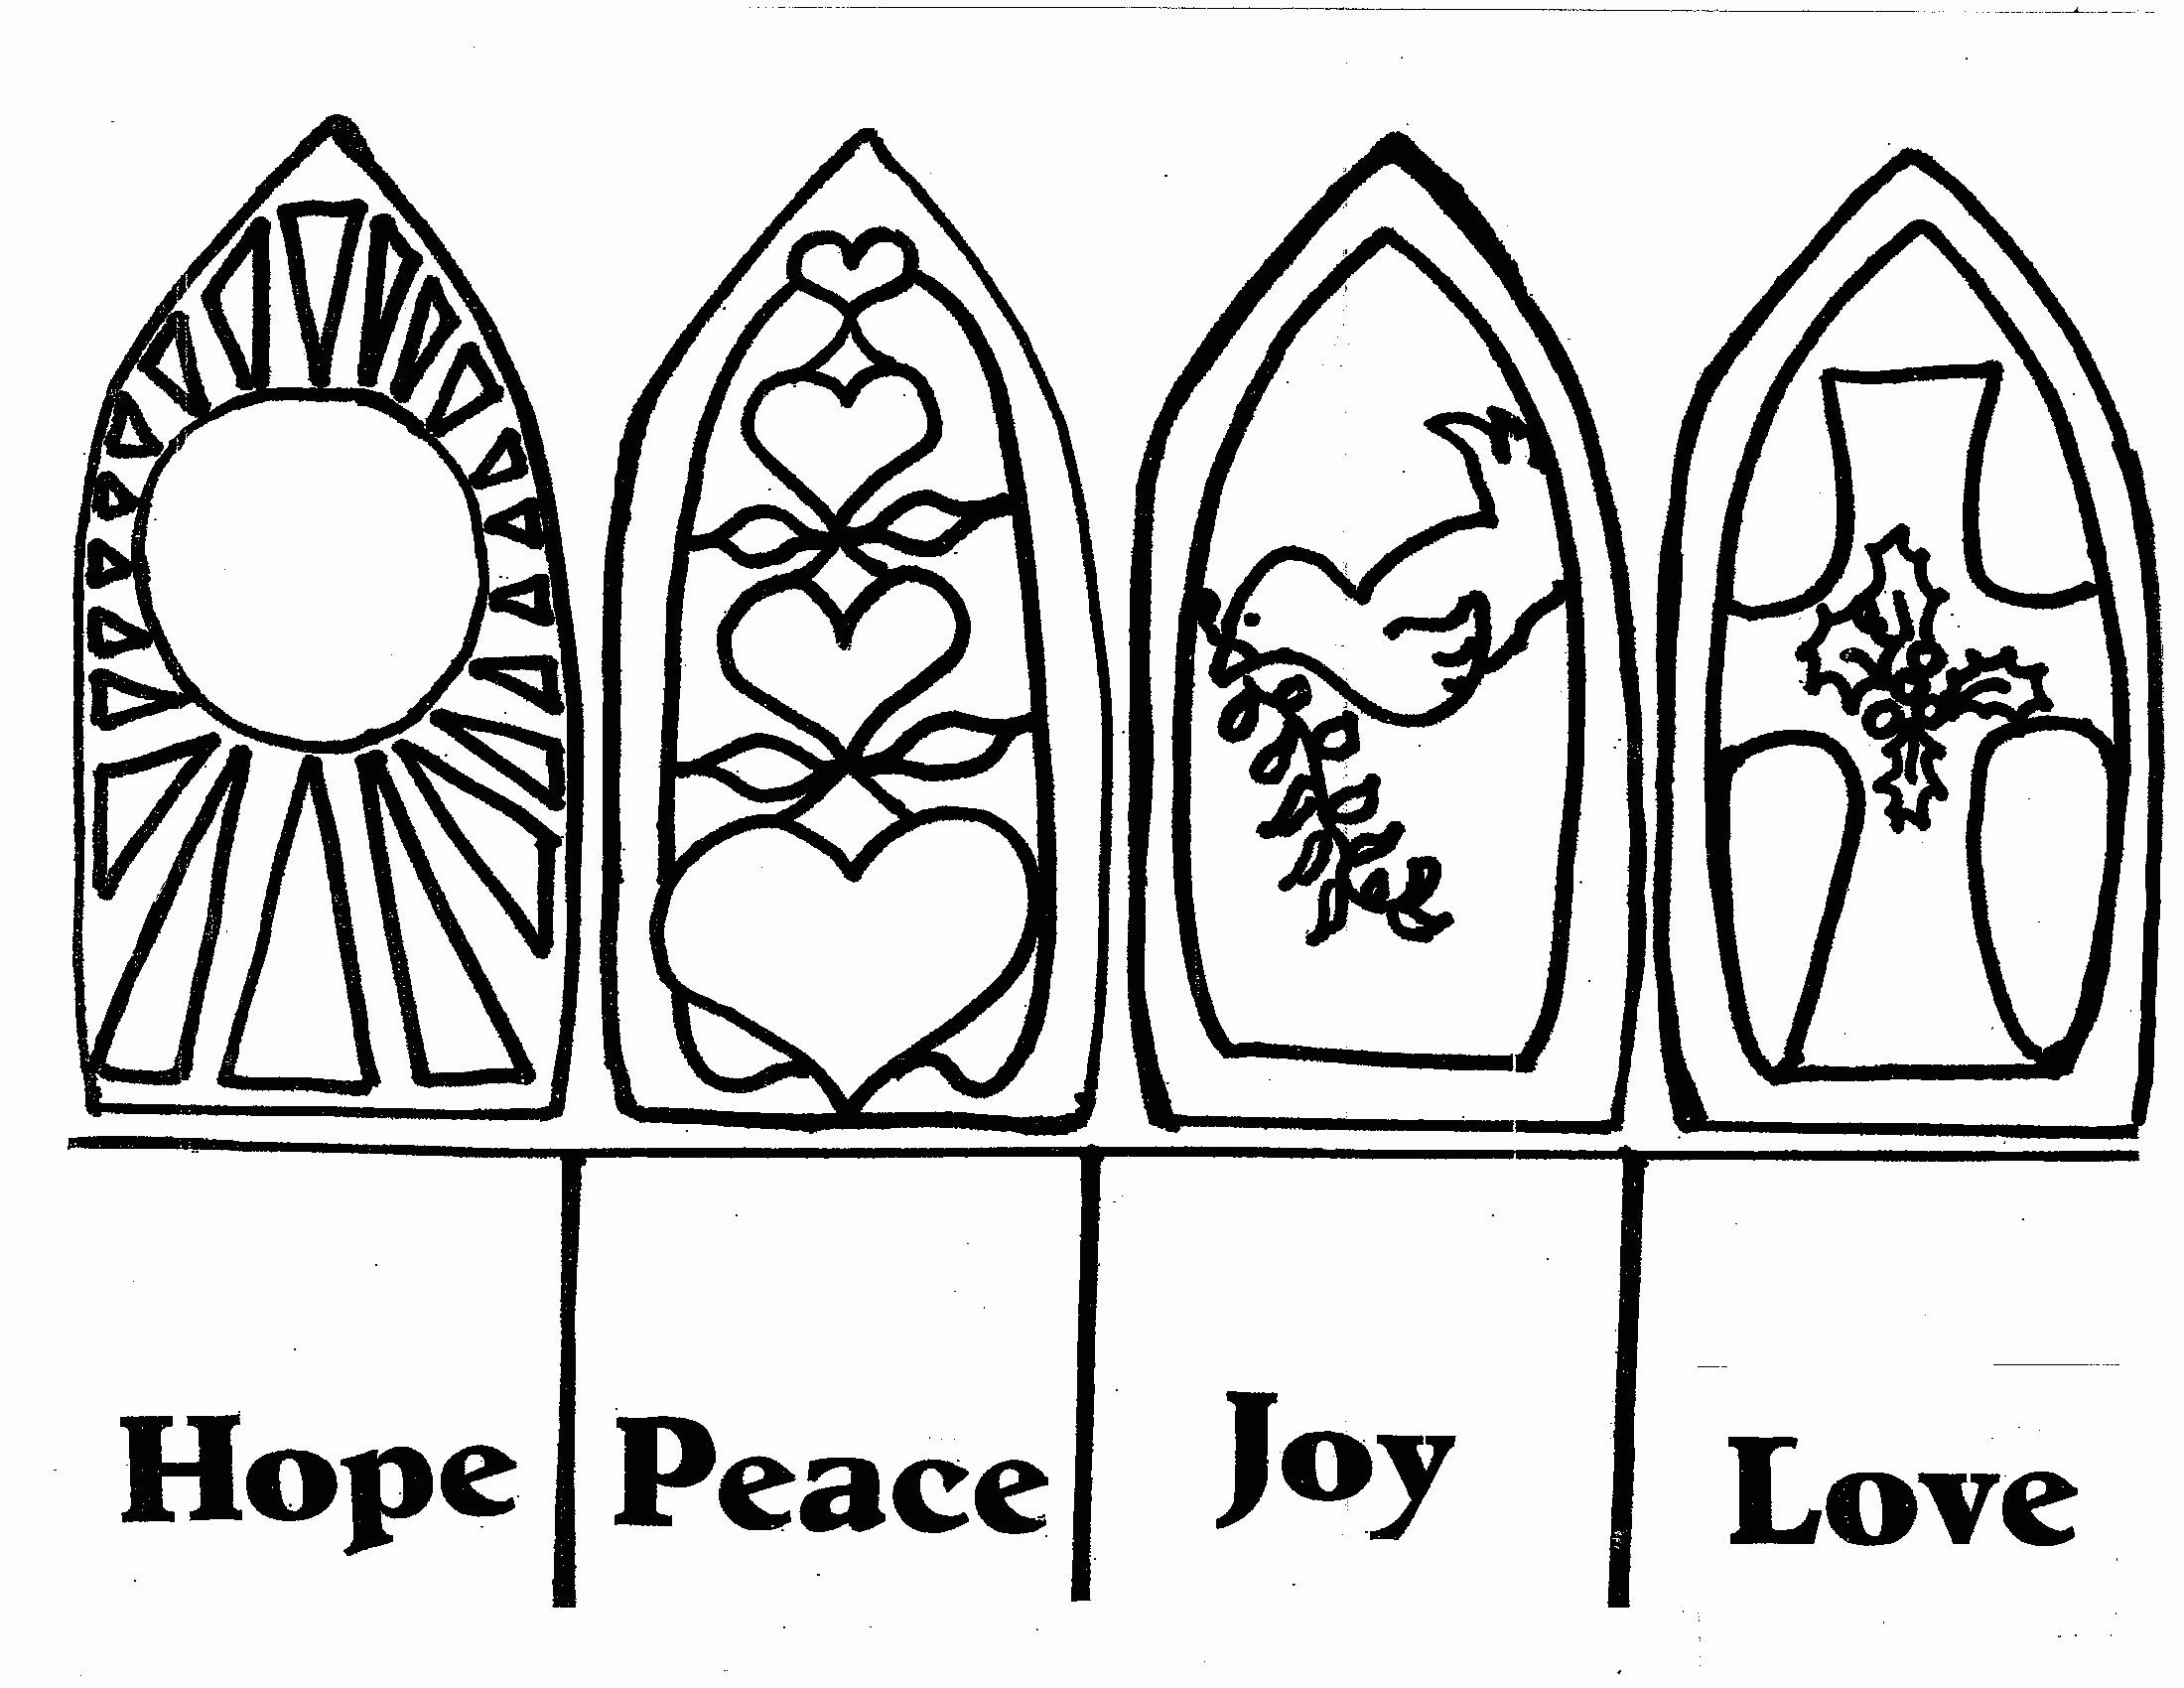 Advent Coloring Pages (14 Pictures) - Colorine.net | 16114